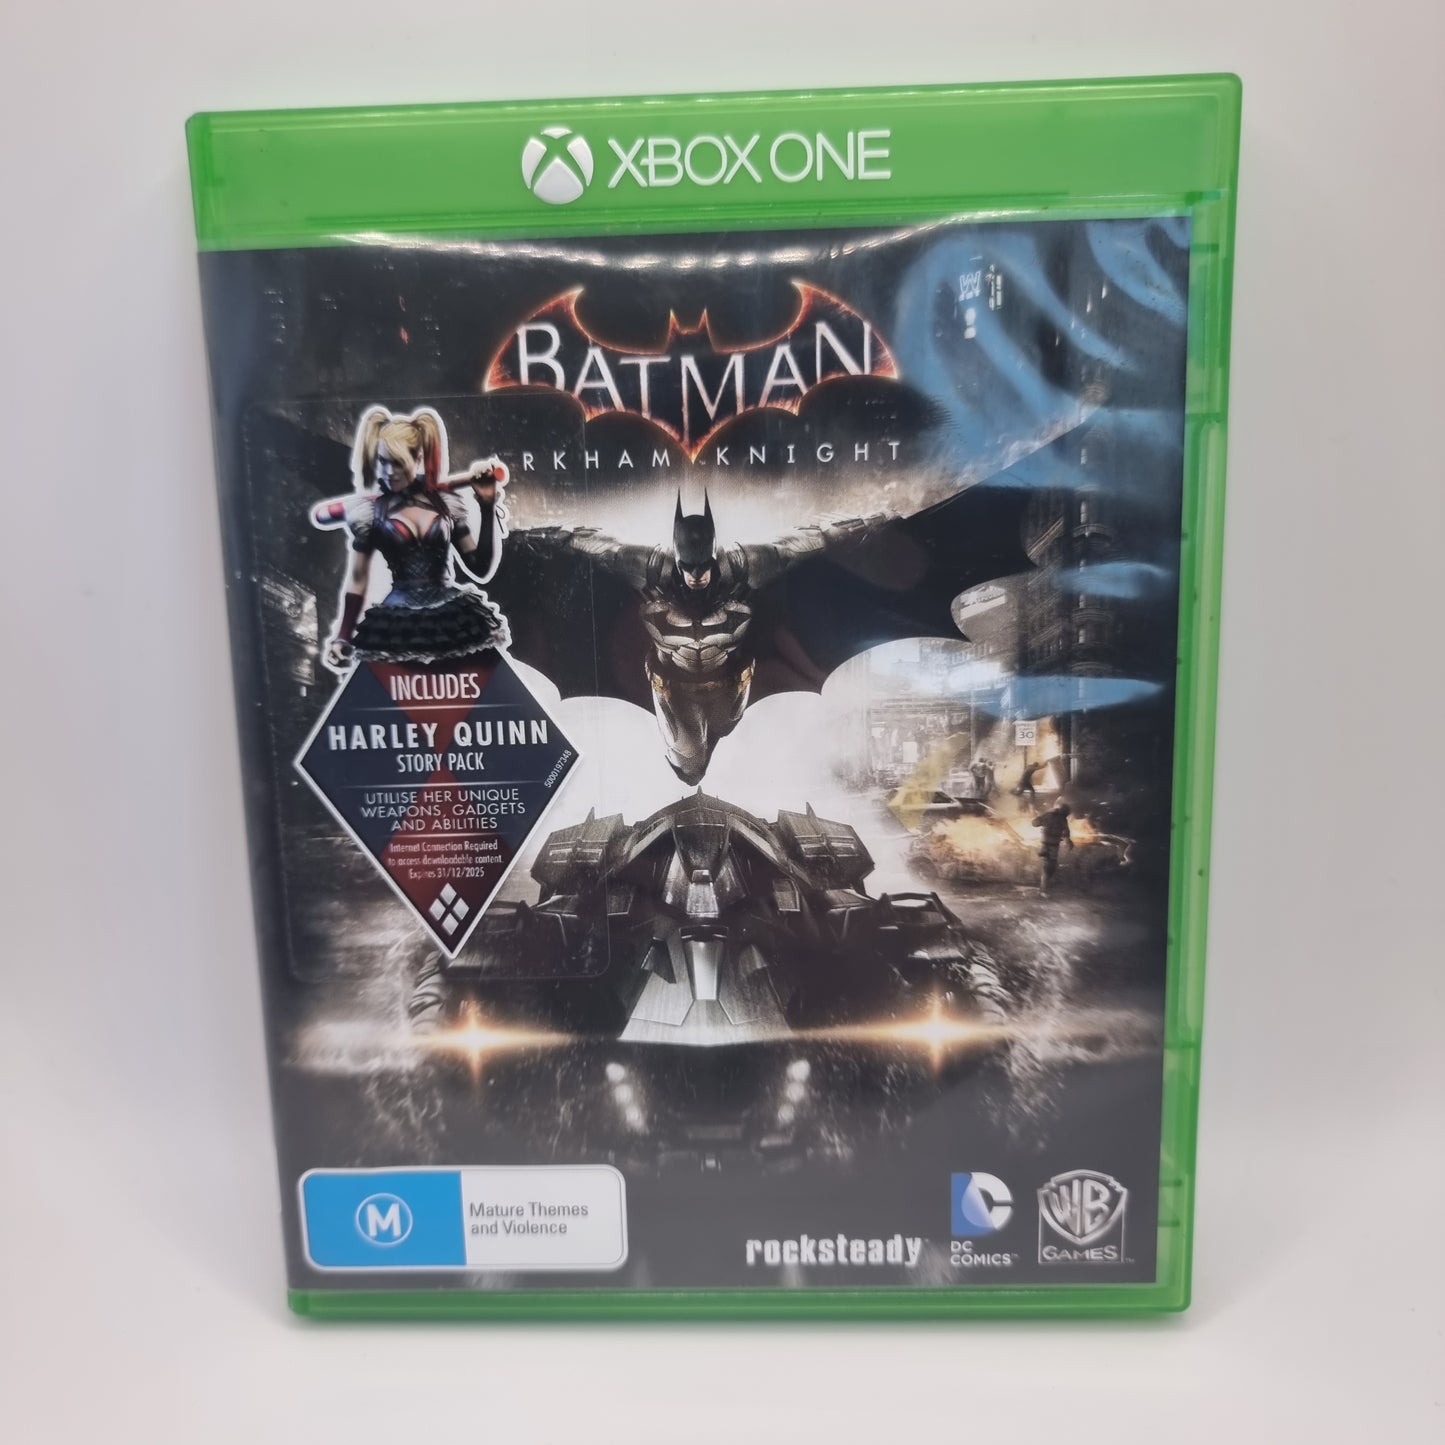 Batman Arkham Knight Xbox One Game - Pre-Owned